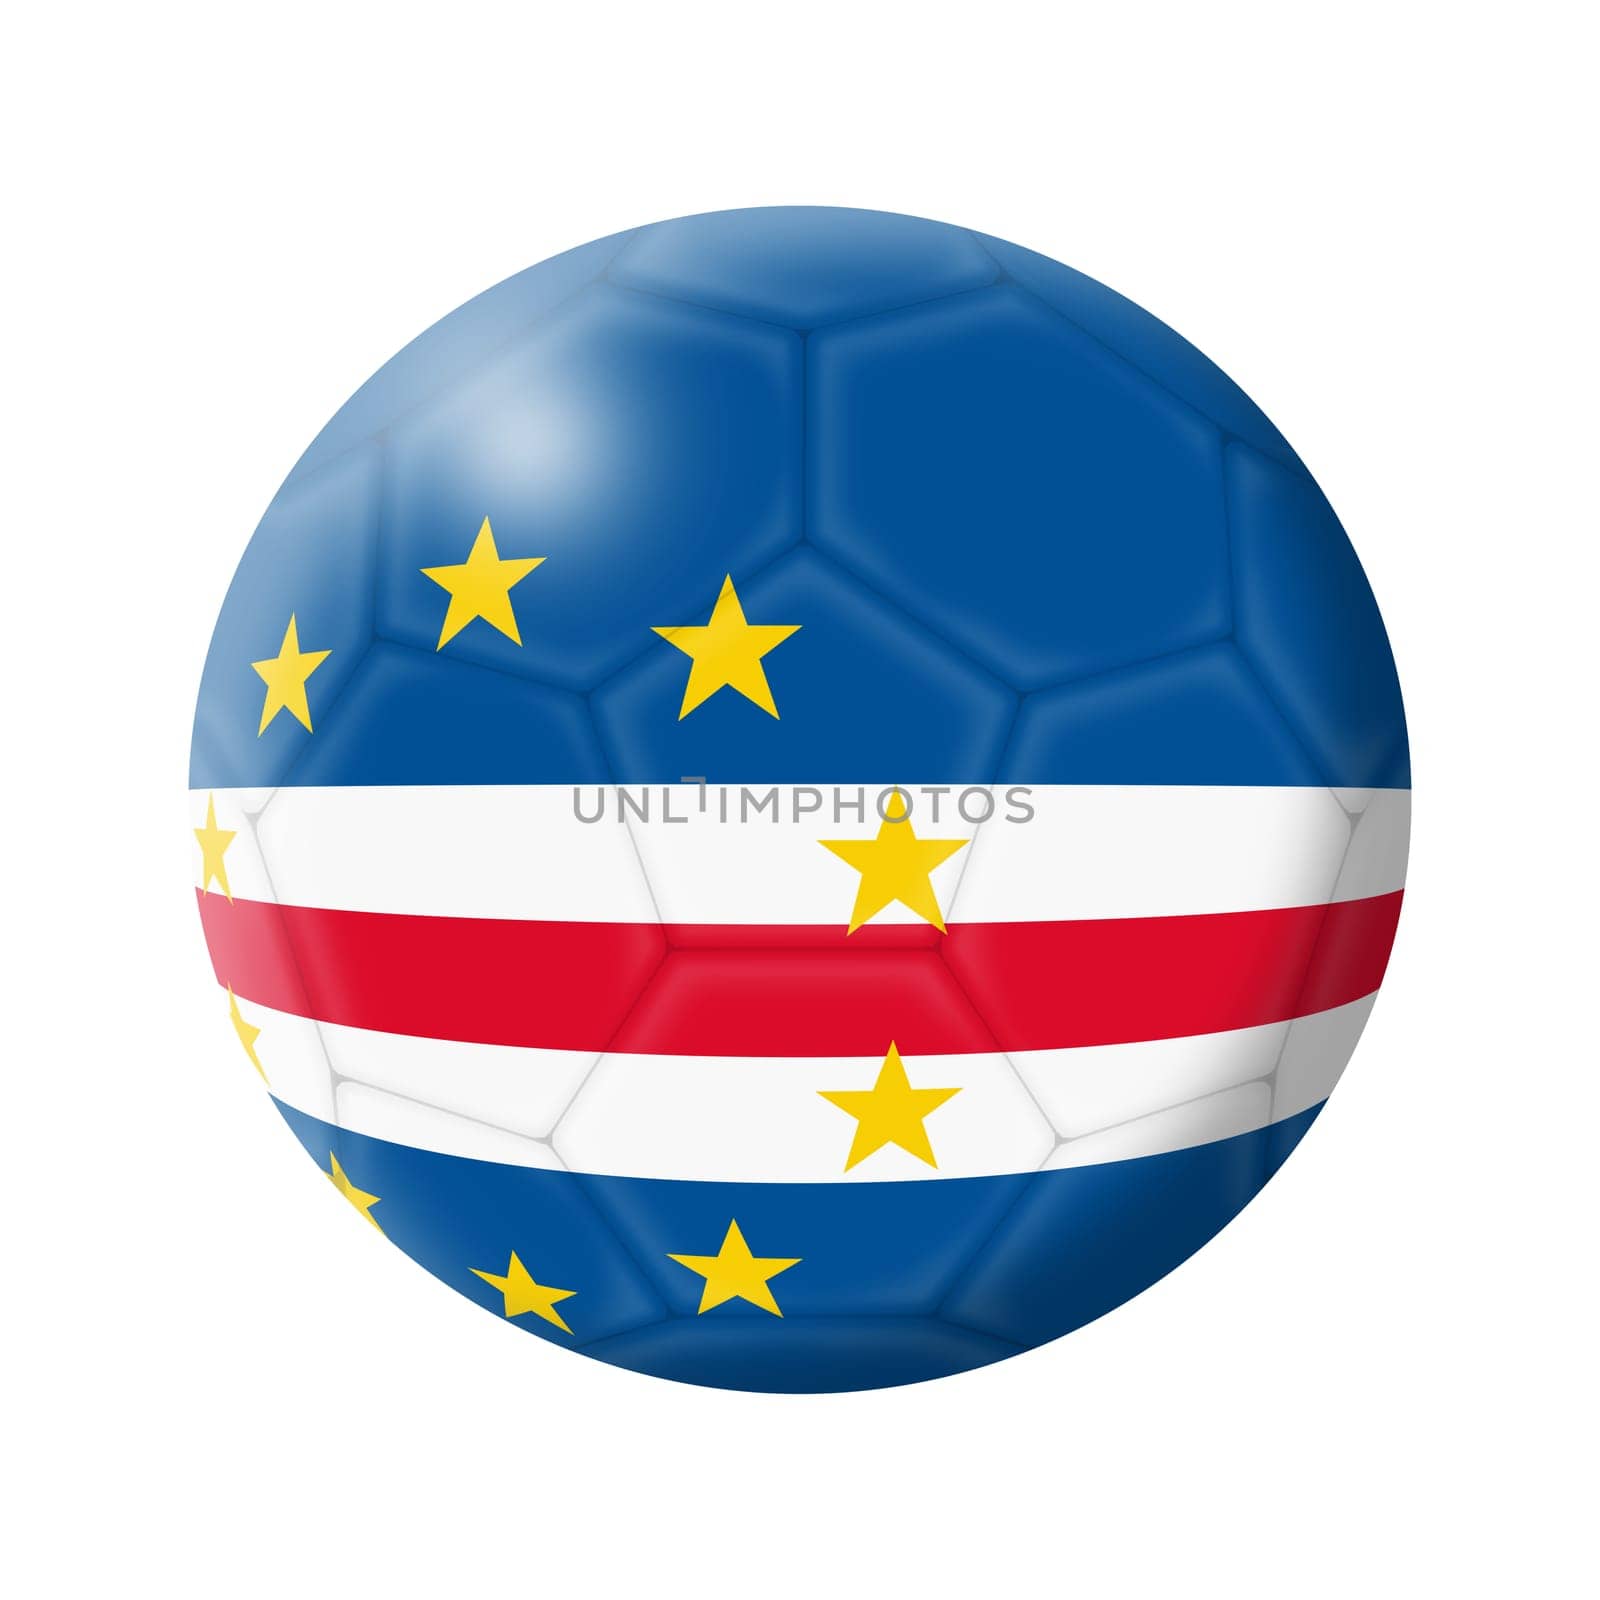 A Cape Verde soccer ball football 3d illustration isolated on white with clipping path